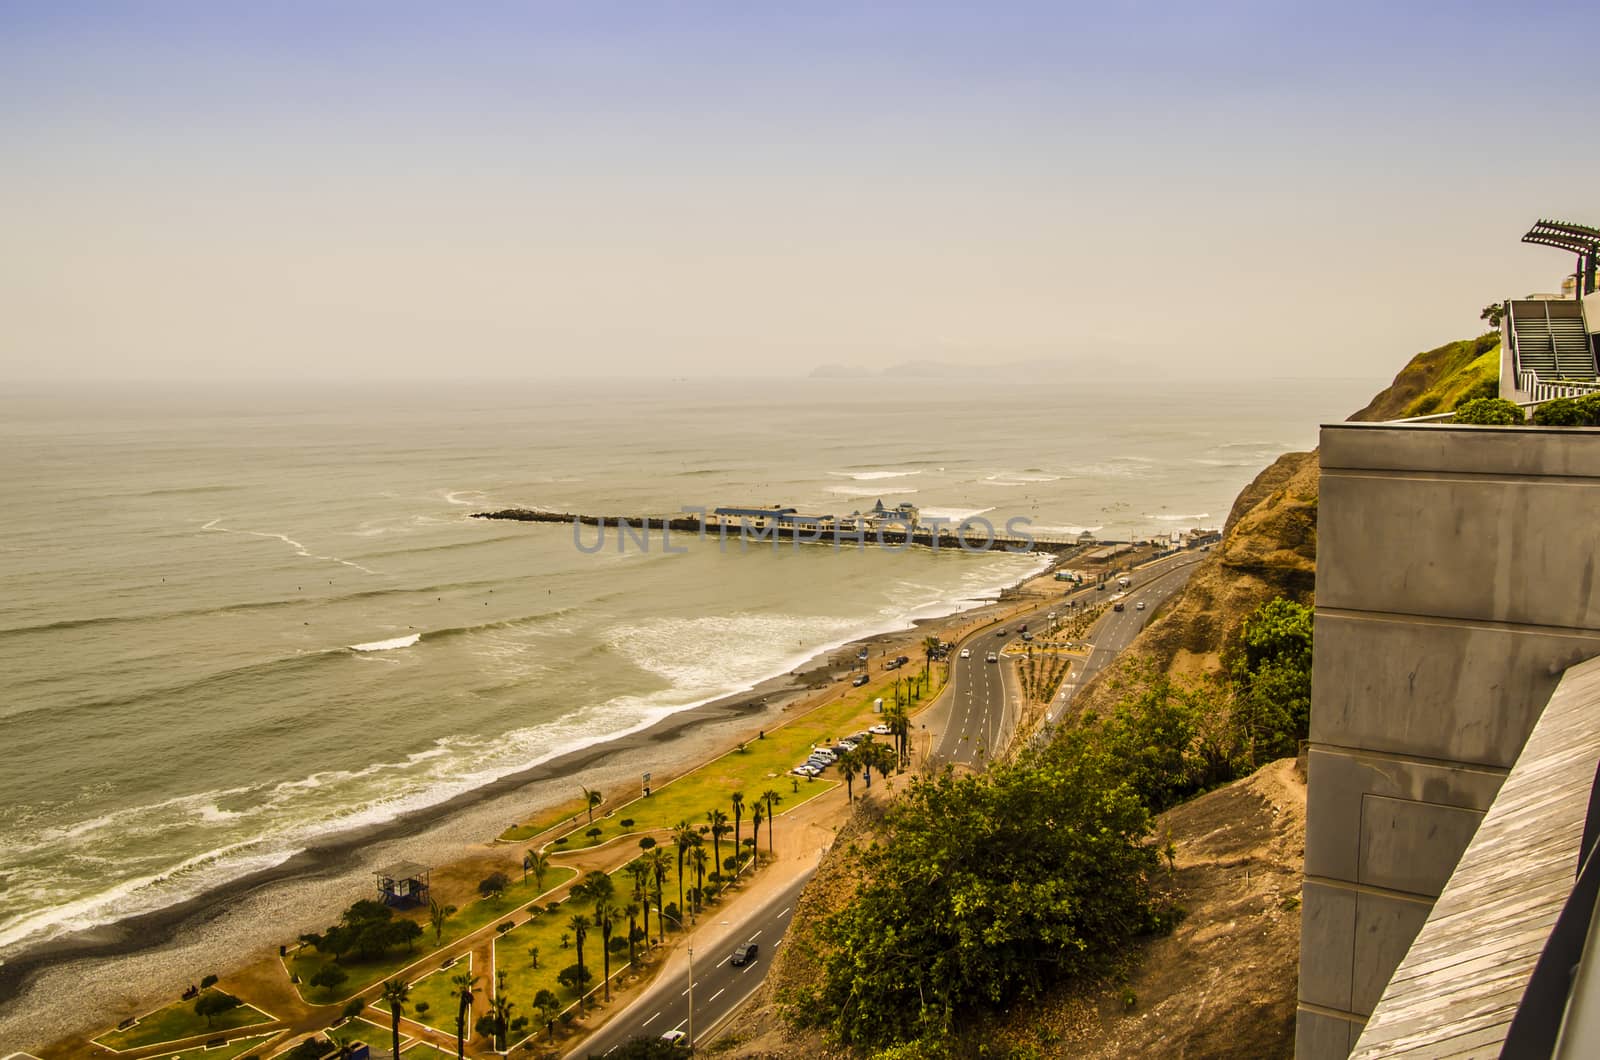 Views from the Miraflores neighborhood to the Pacific beaches from the cliffs.